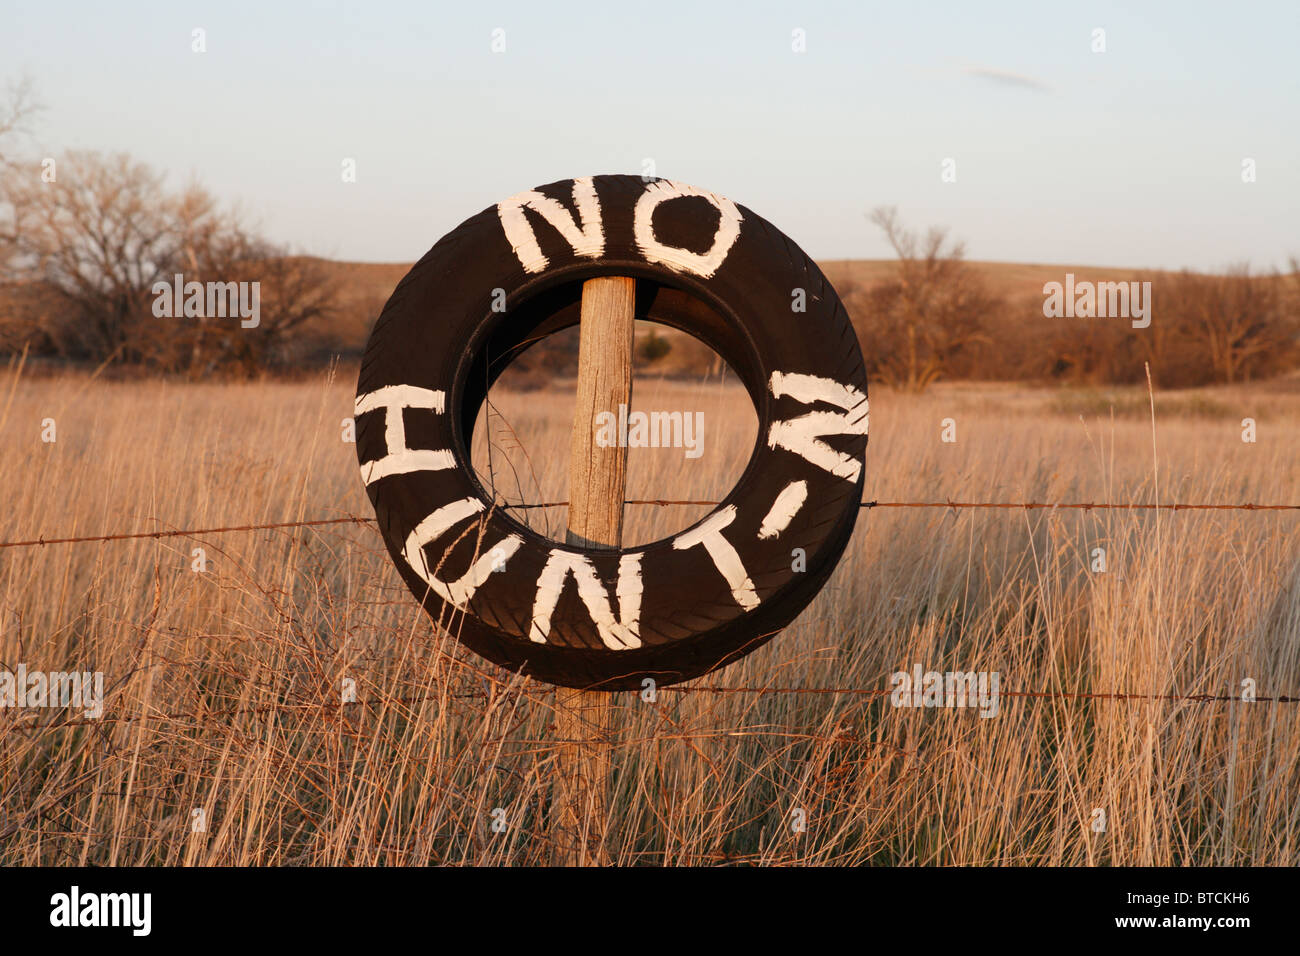 'No Hunt-N' painted on a tire hung on a fence in rural Nebraska. Stock Photo